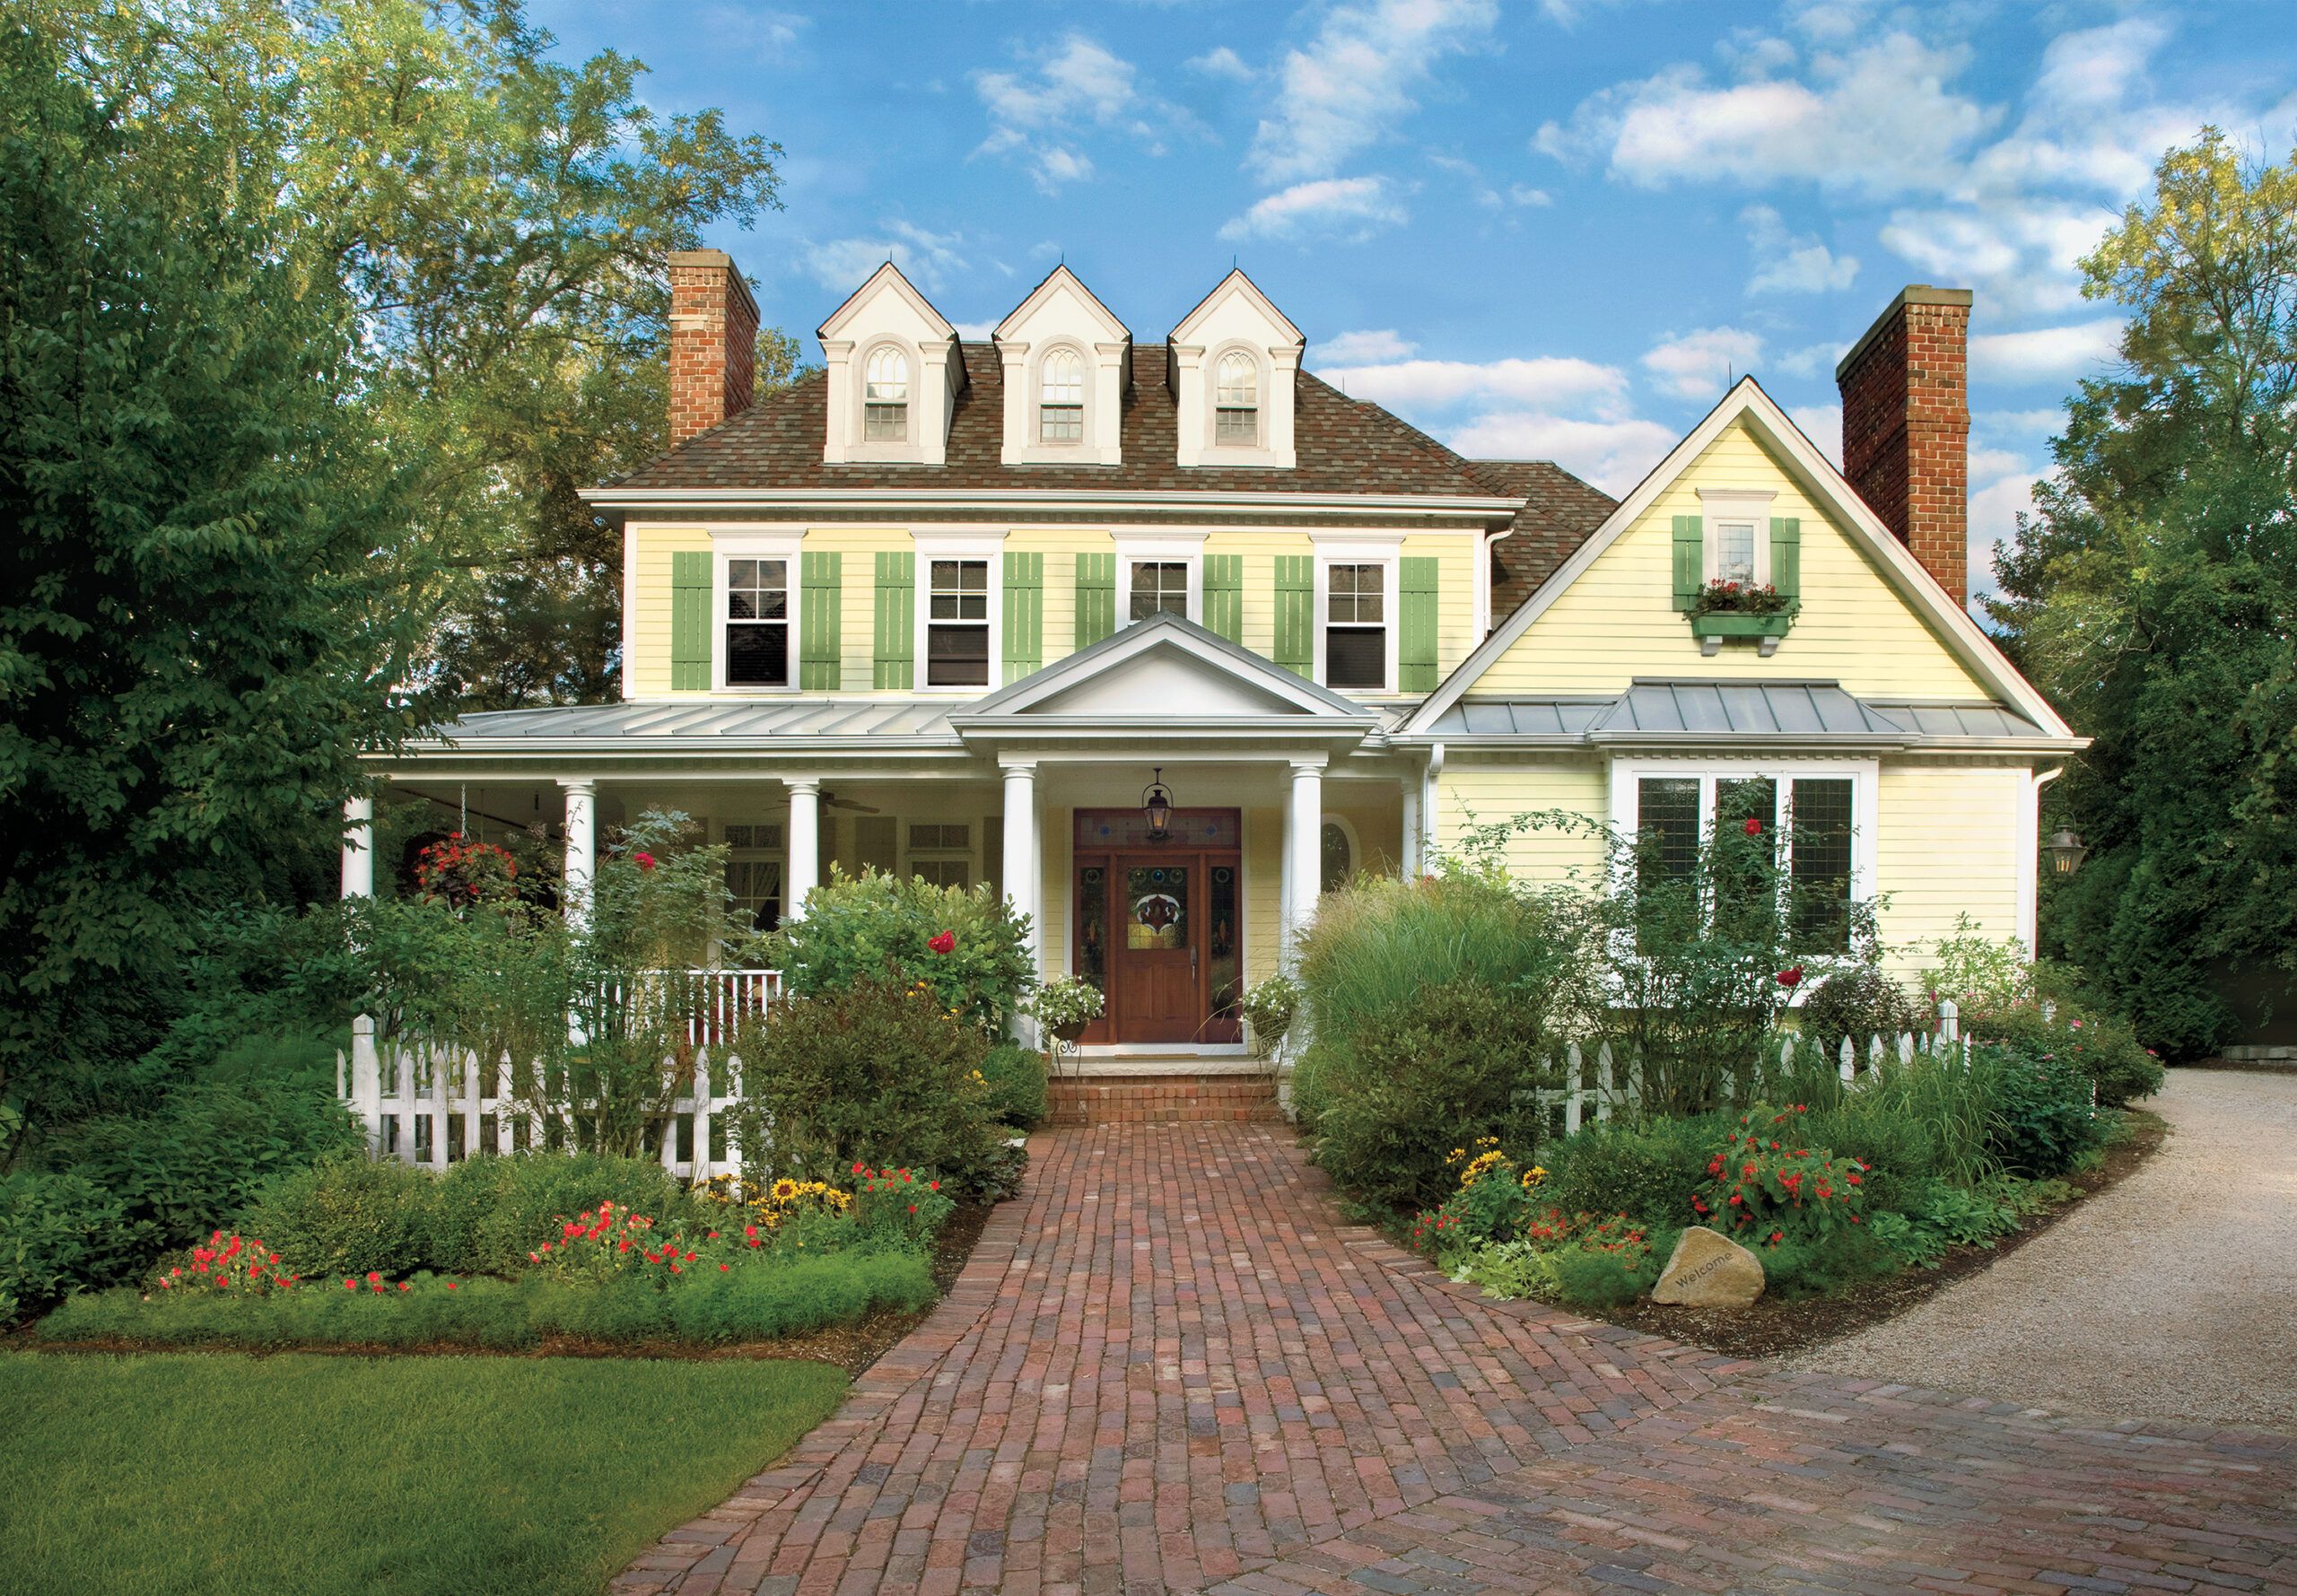 How To Get The Best Curb Appeal On The Block - This Old House